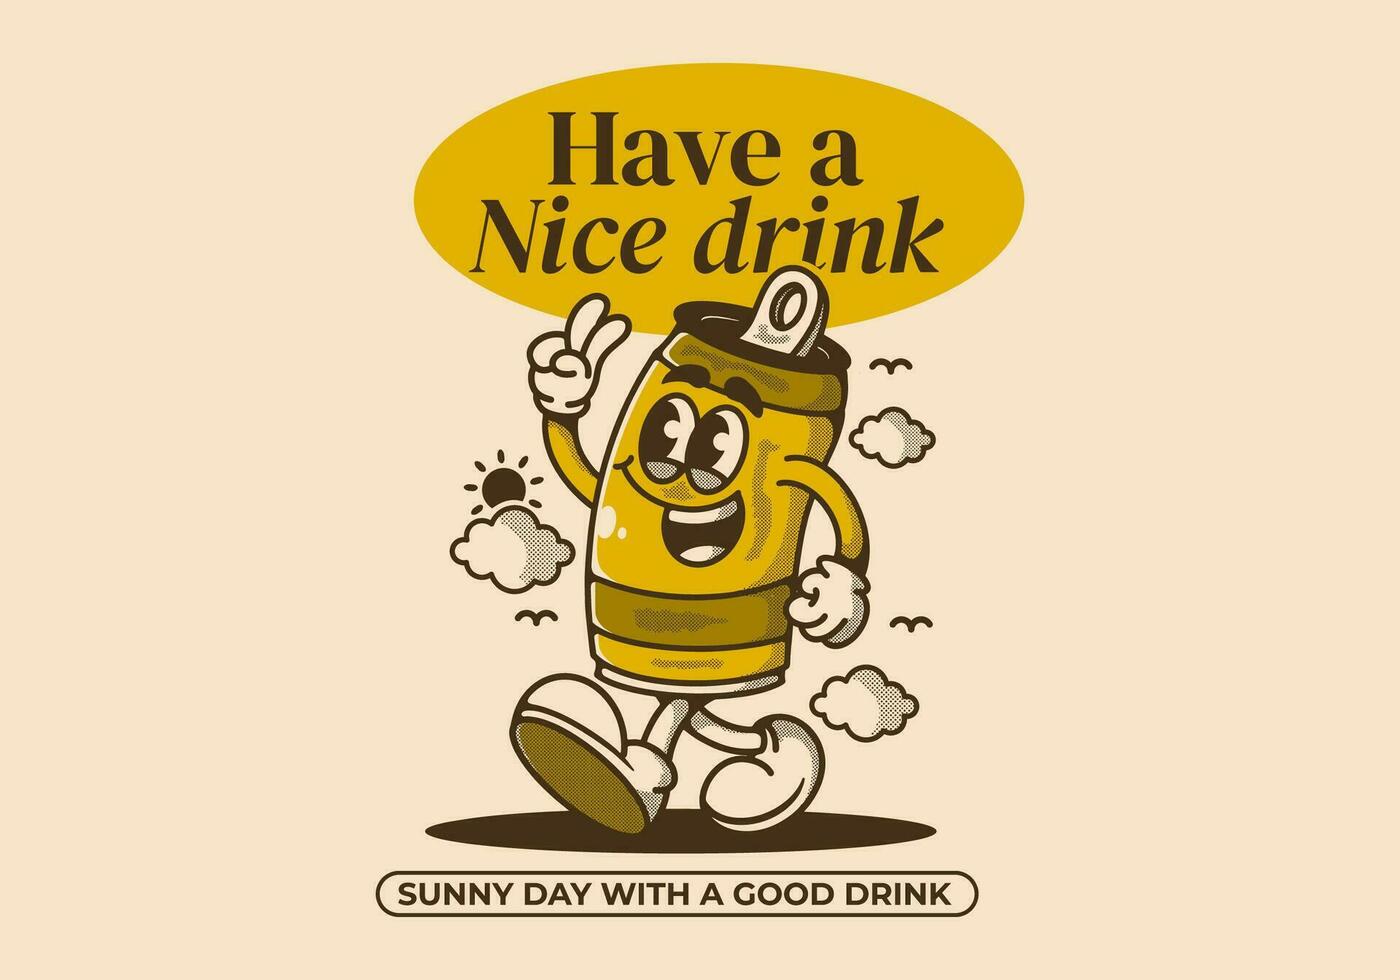 Have a nice drink. sunny day with a good drink. Mascot character illustration of walking beer can vector